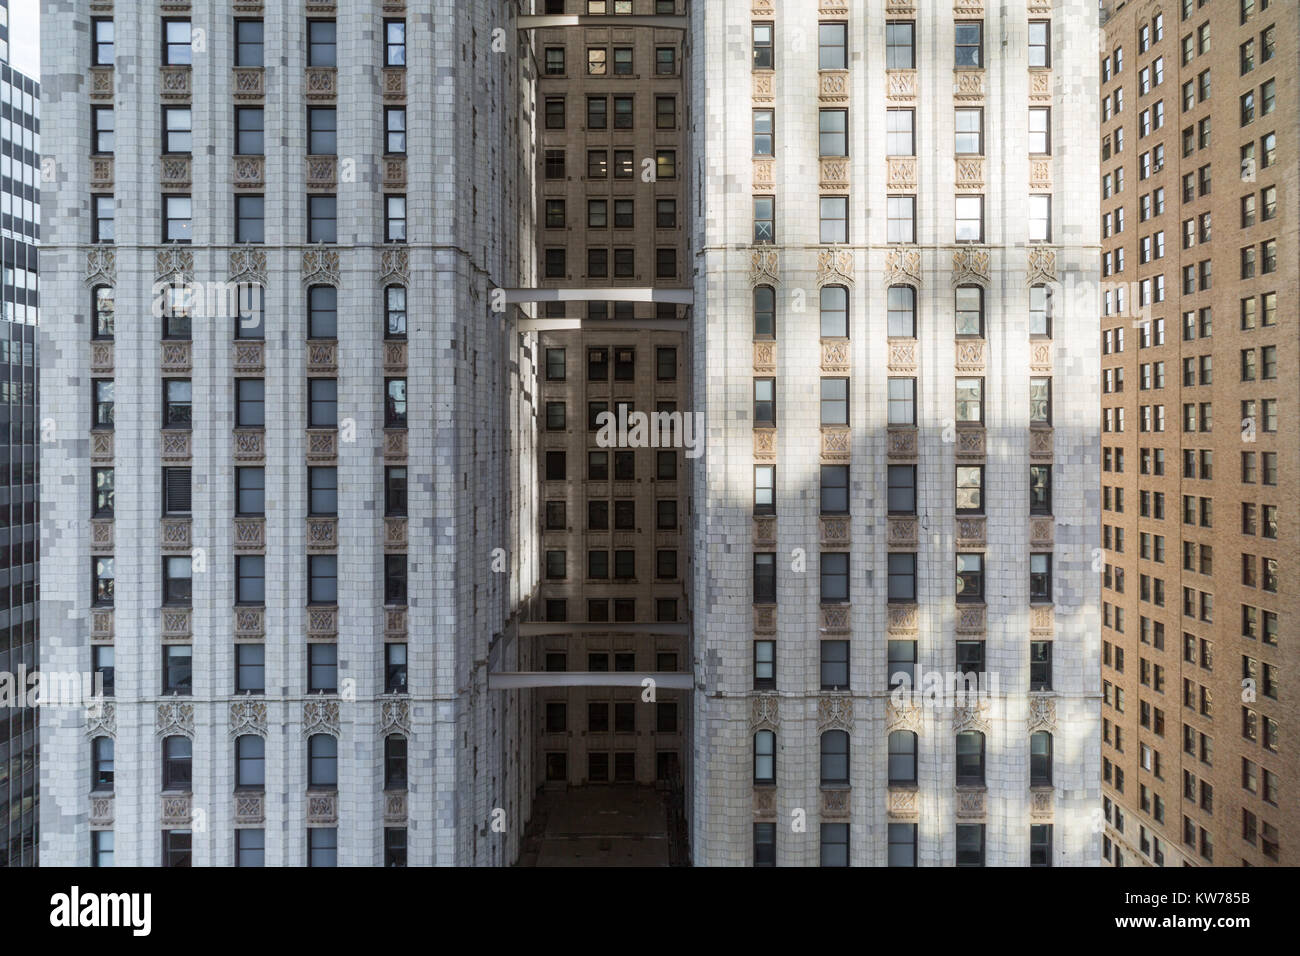 detail image of the facade of several buildings in downtown manhattan, Stock Photo